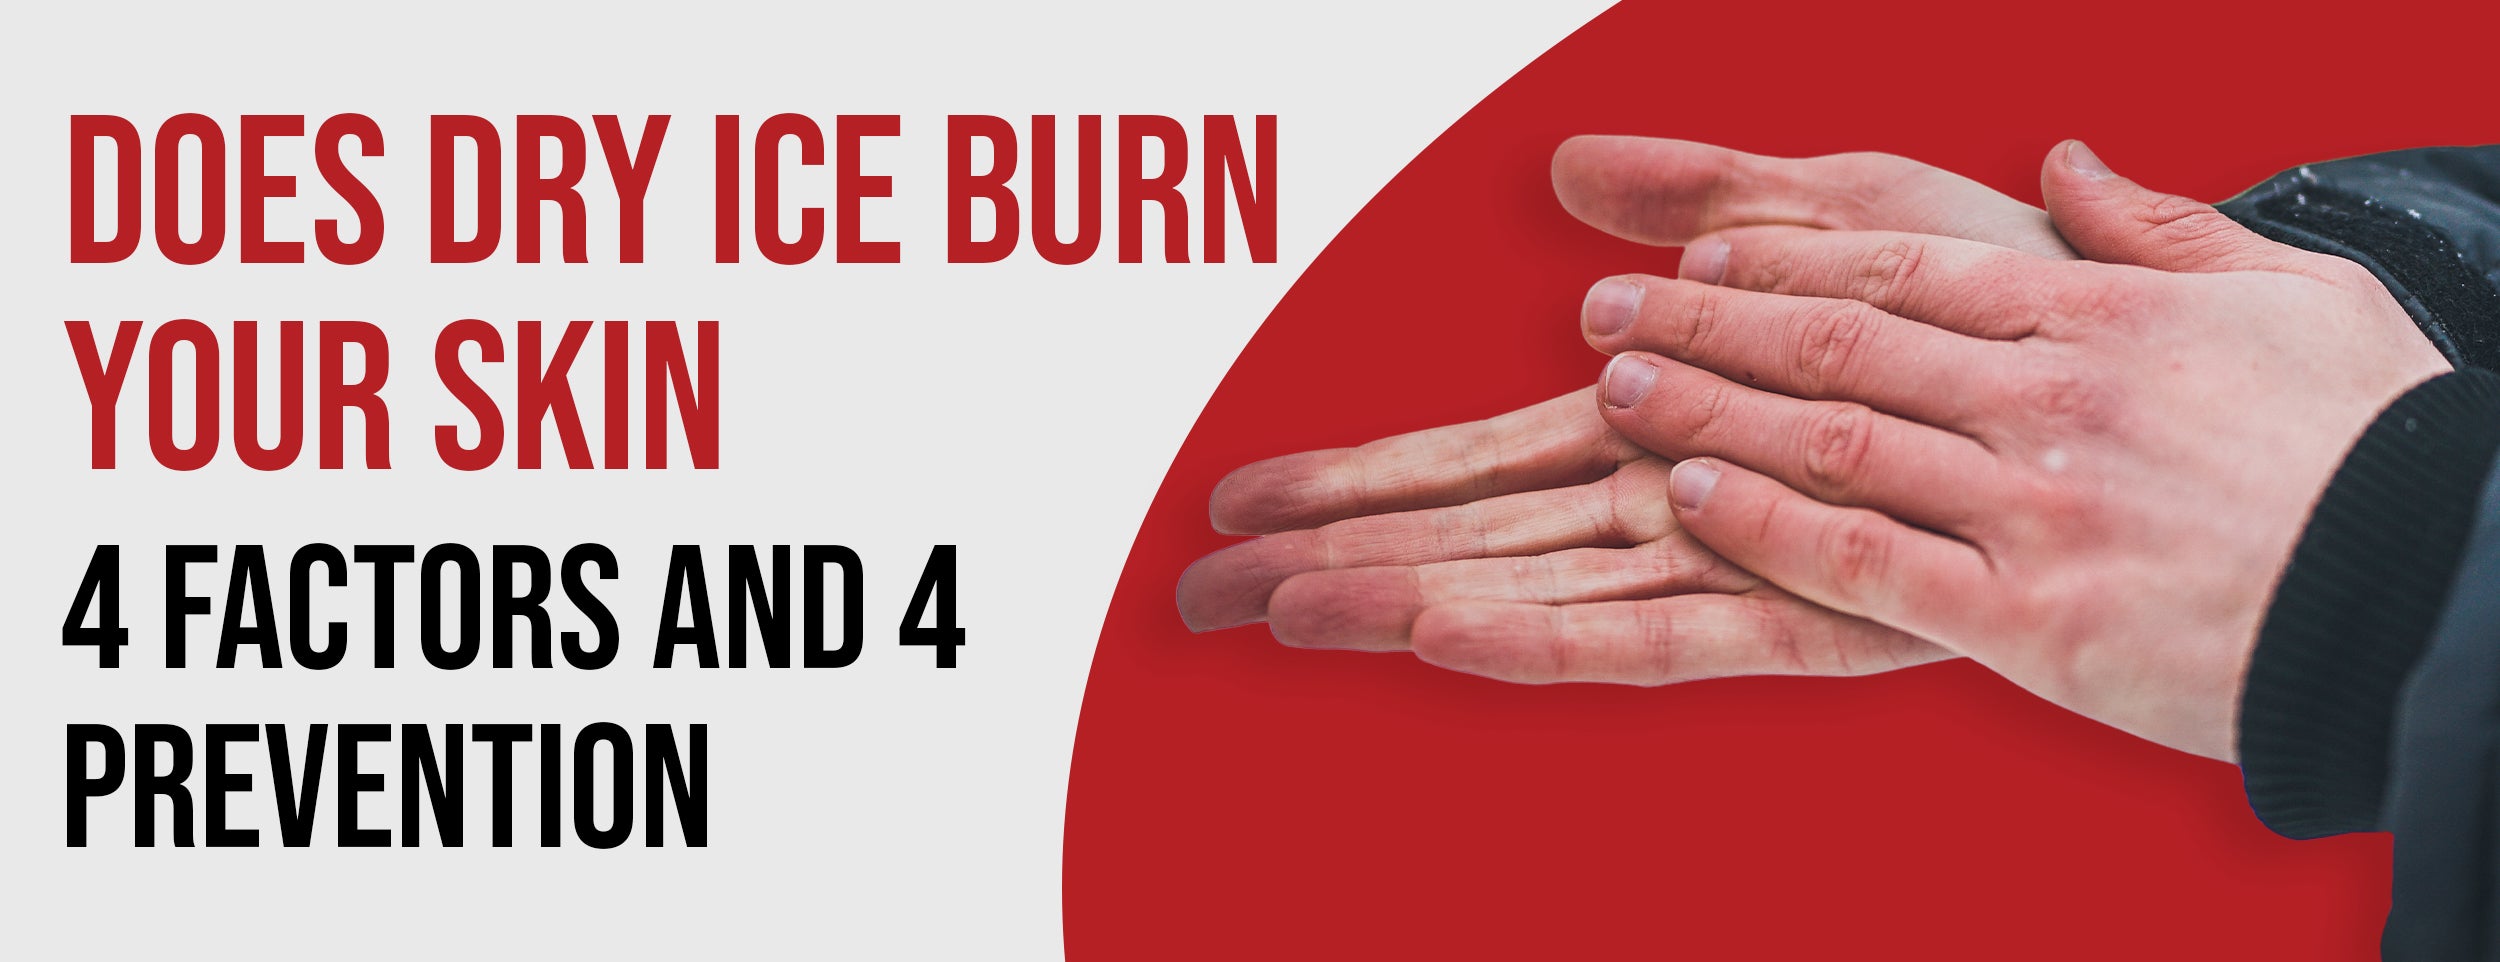 The 4 factors and 4 preventions of dry ice burn